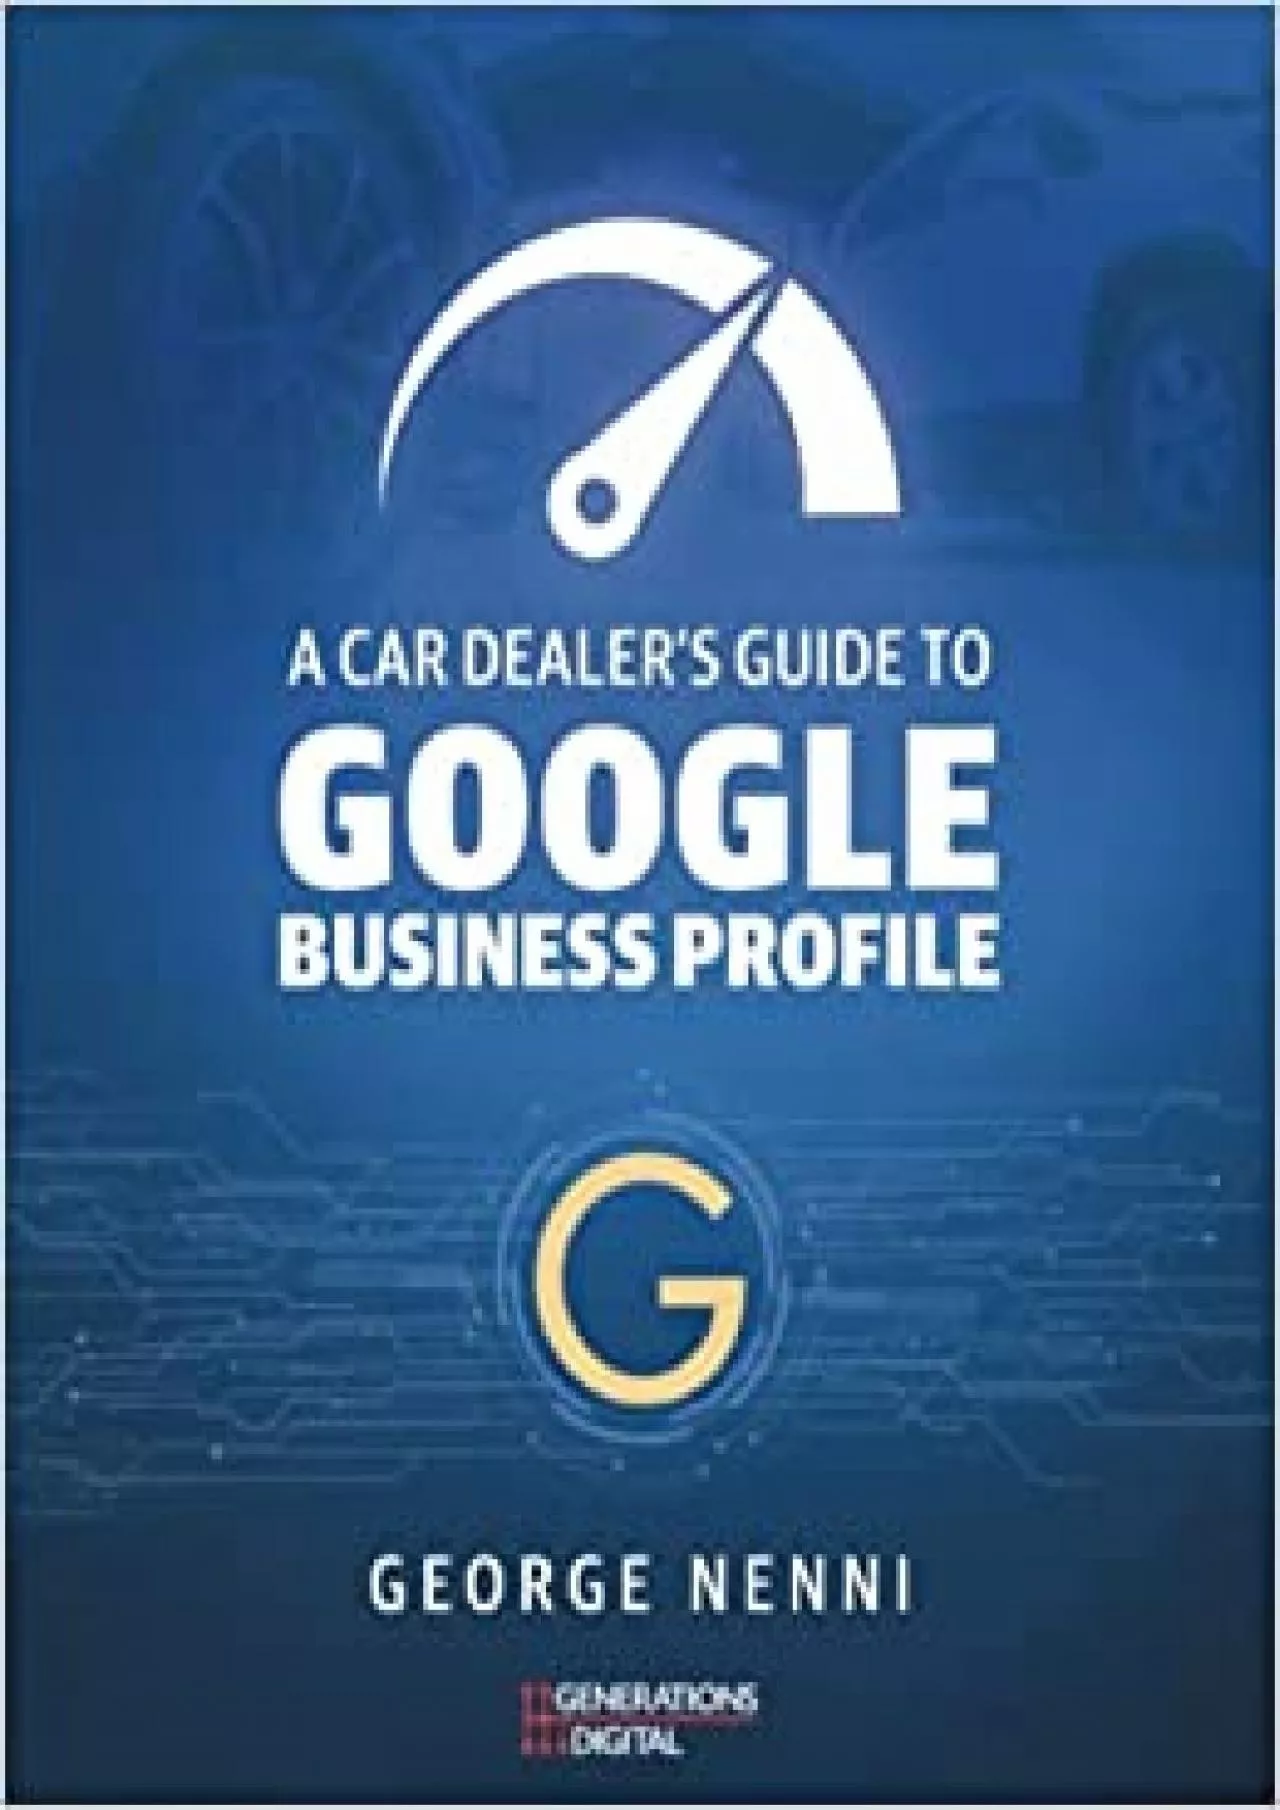 A Car Dealer’s Guide to Google Business Profile Today Local Search Engine Optimization